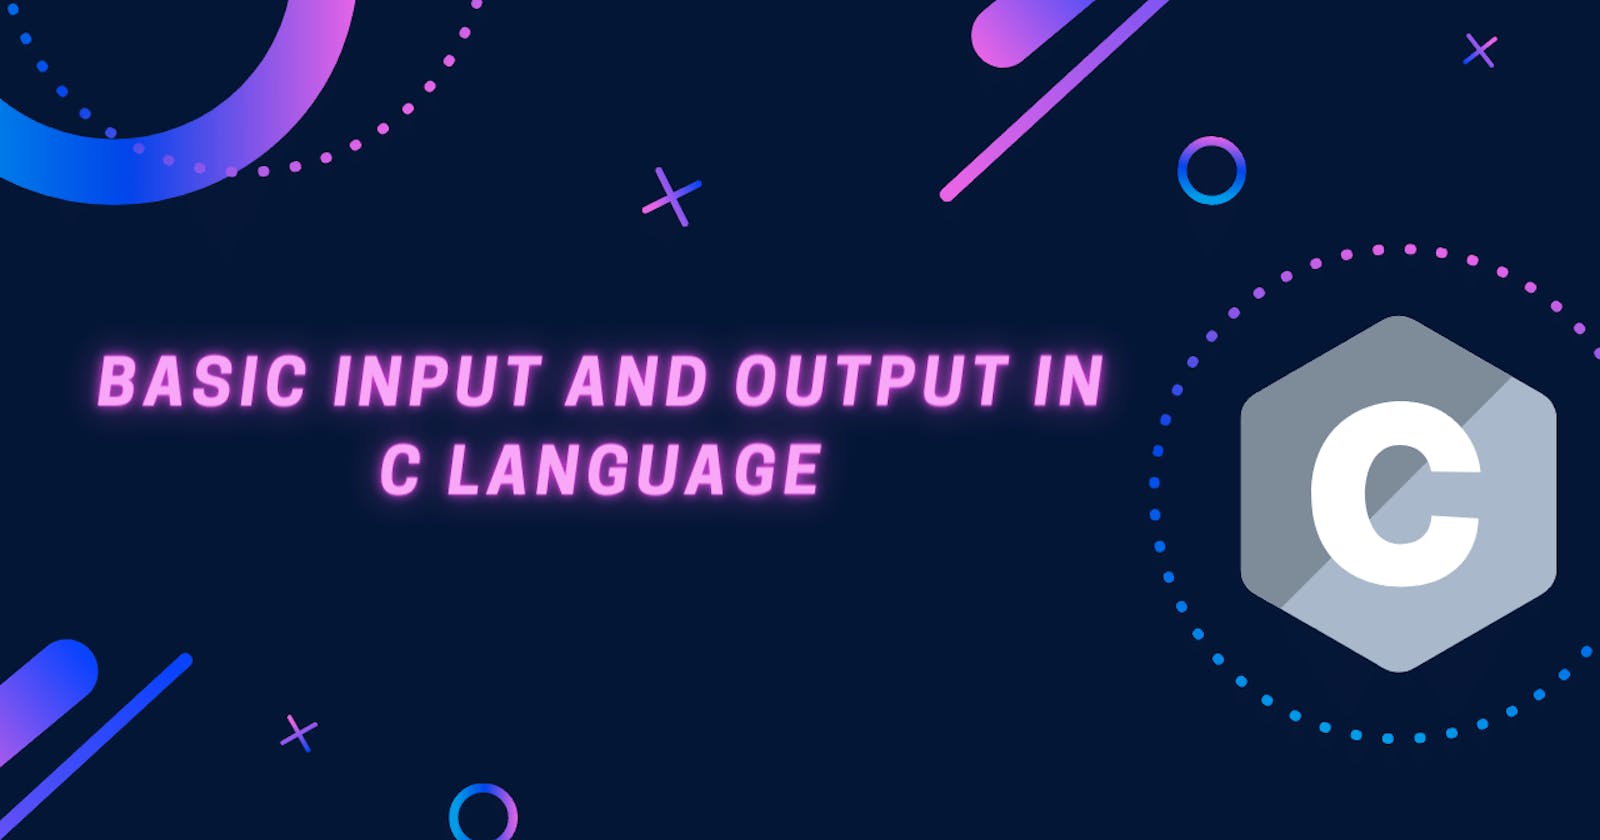 Basic Input and Output in C Language